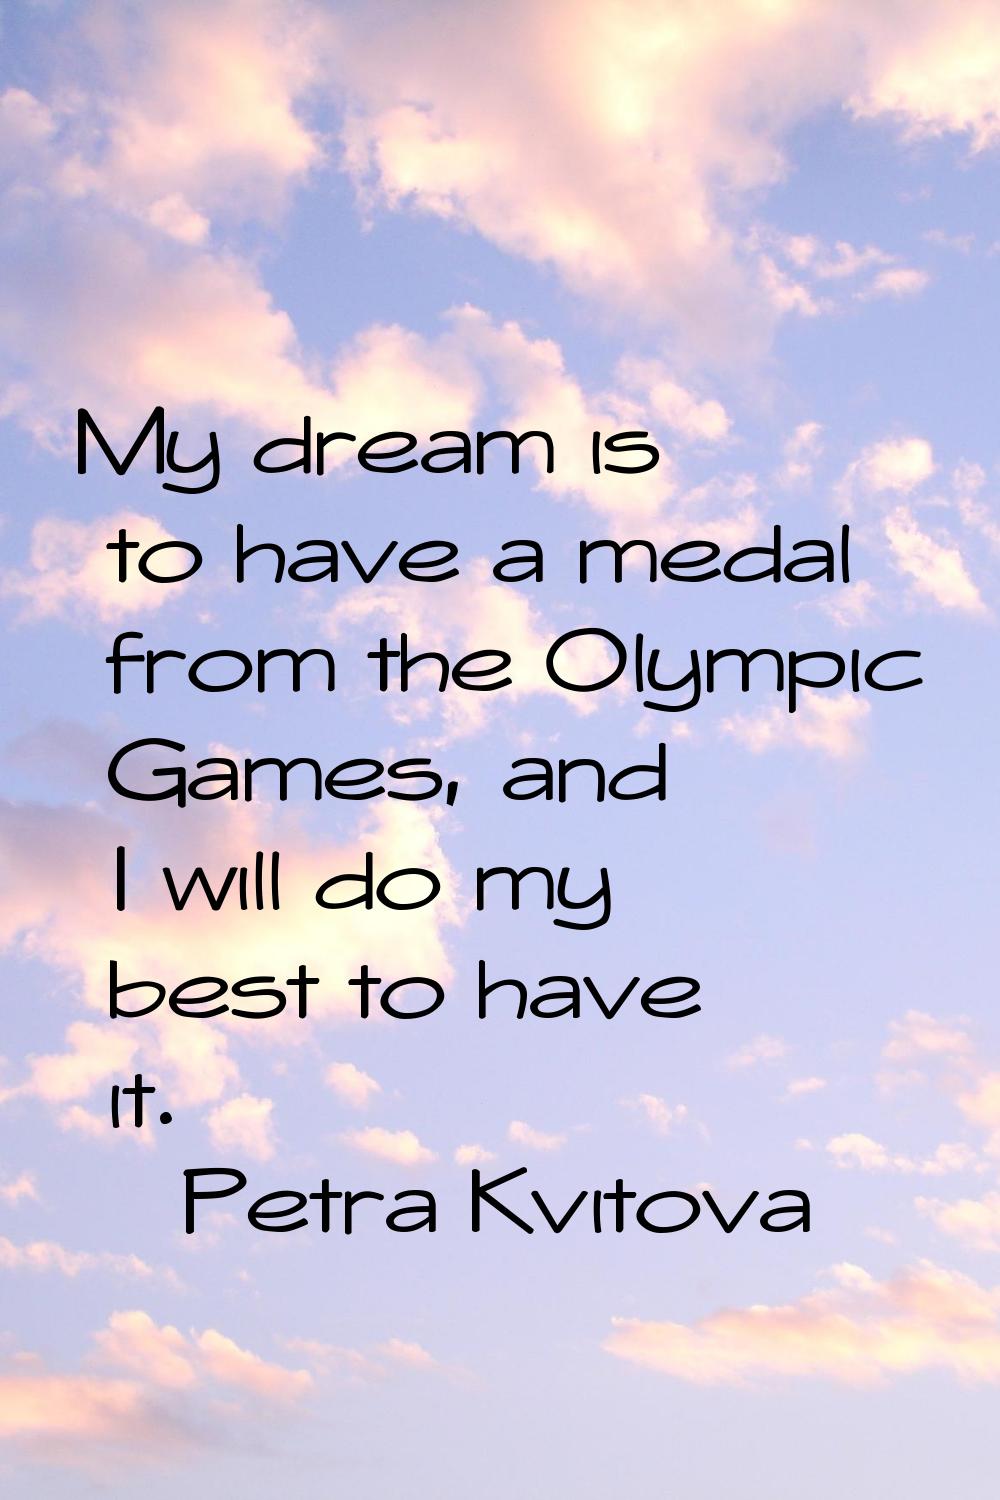 My dream is to have a medal from the Olympic Games, and I will do my best to have it.